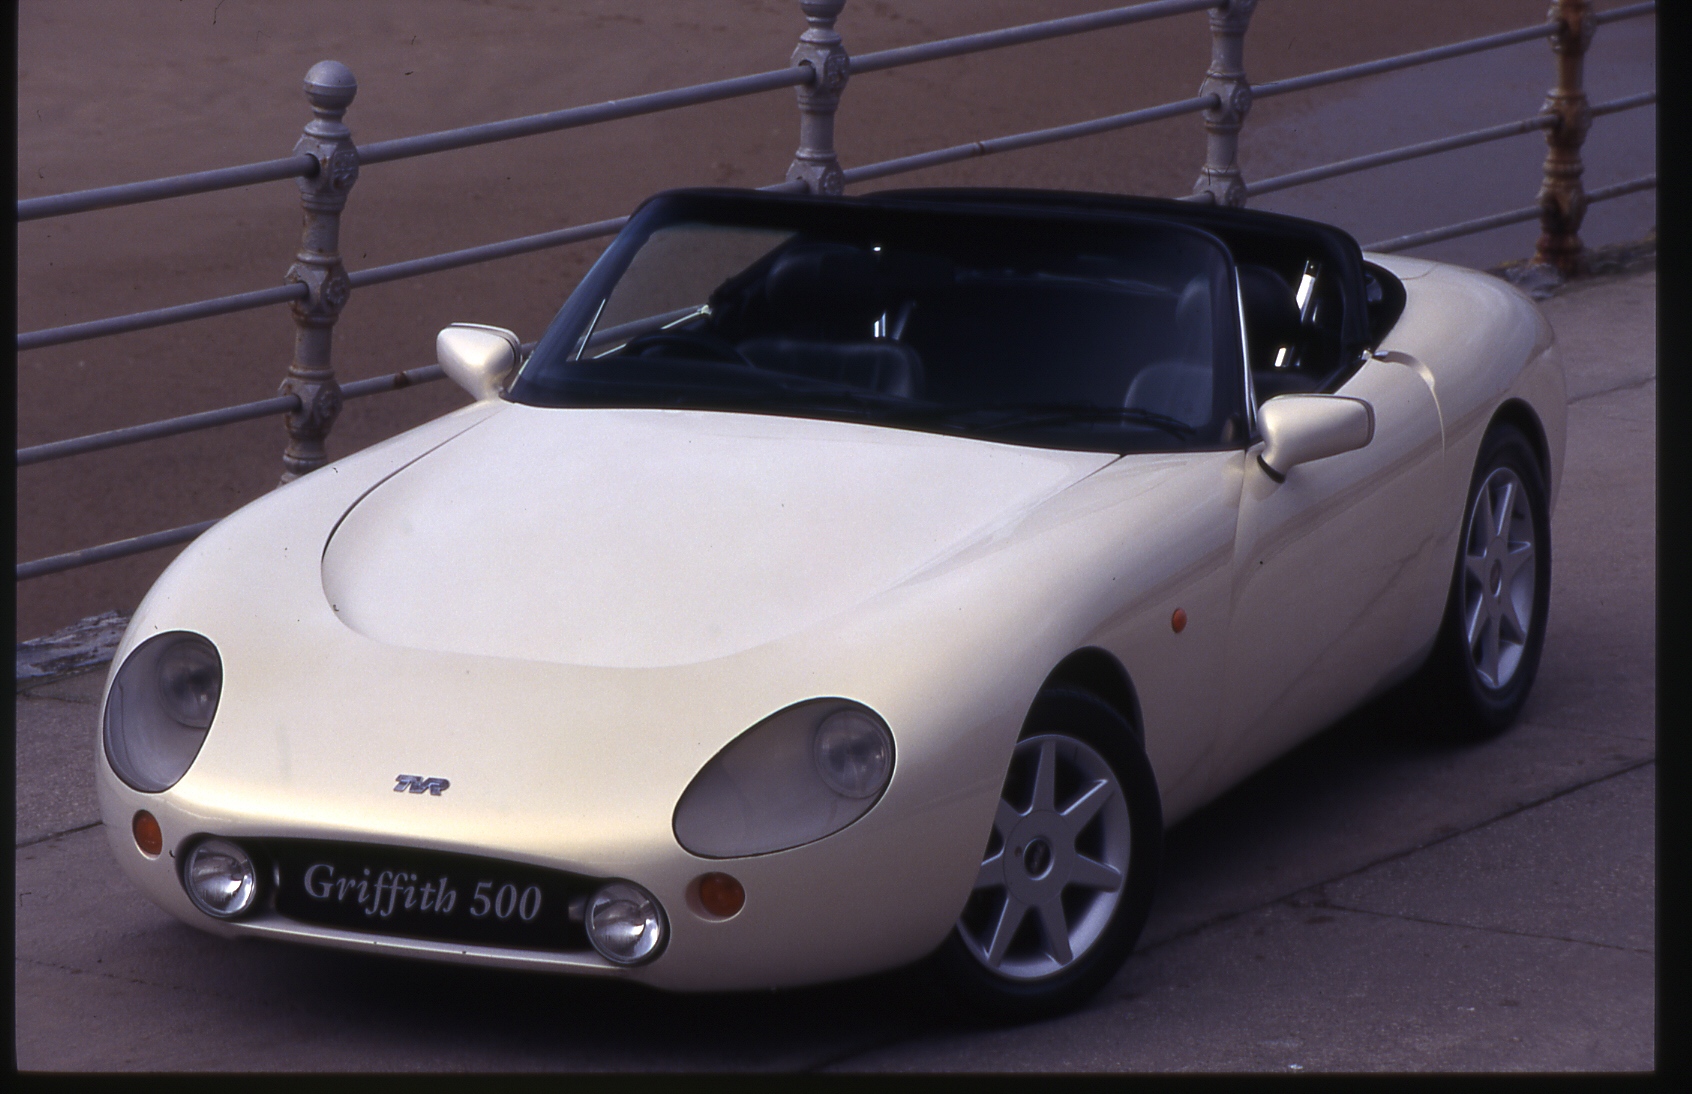 TVR, TVR Griffith, Griffith buying guide, Griffith Front